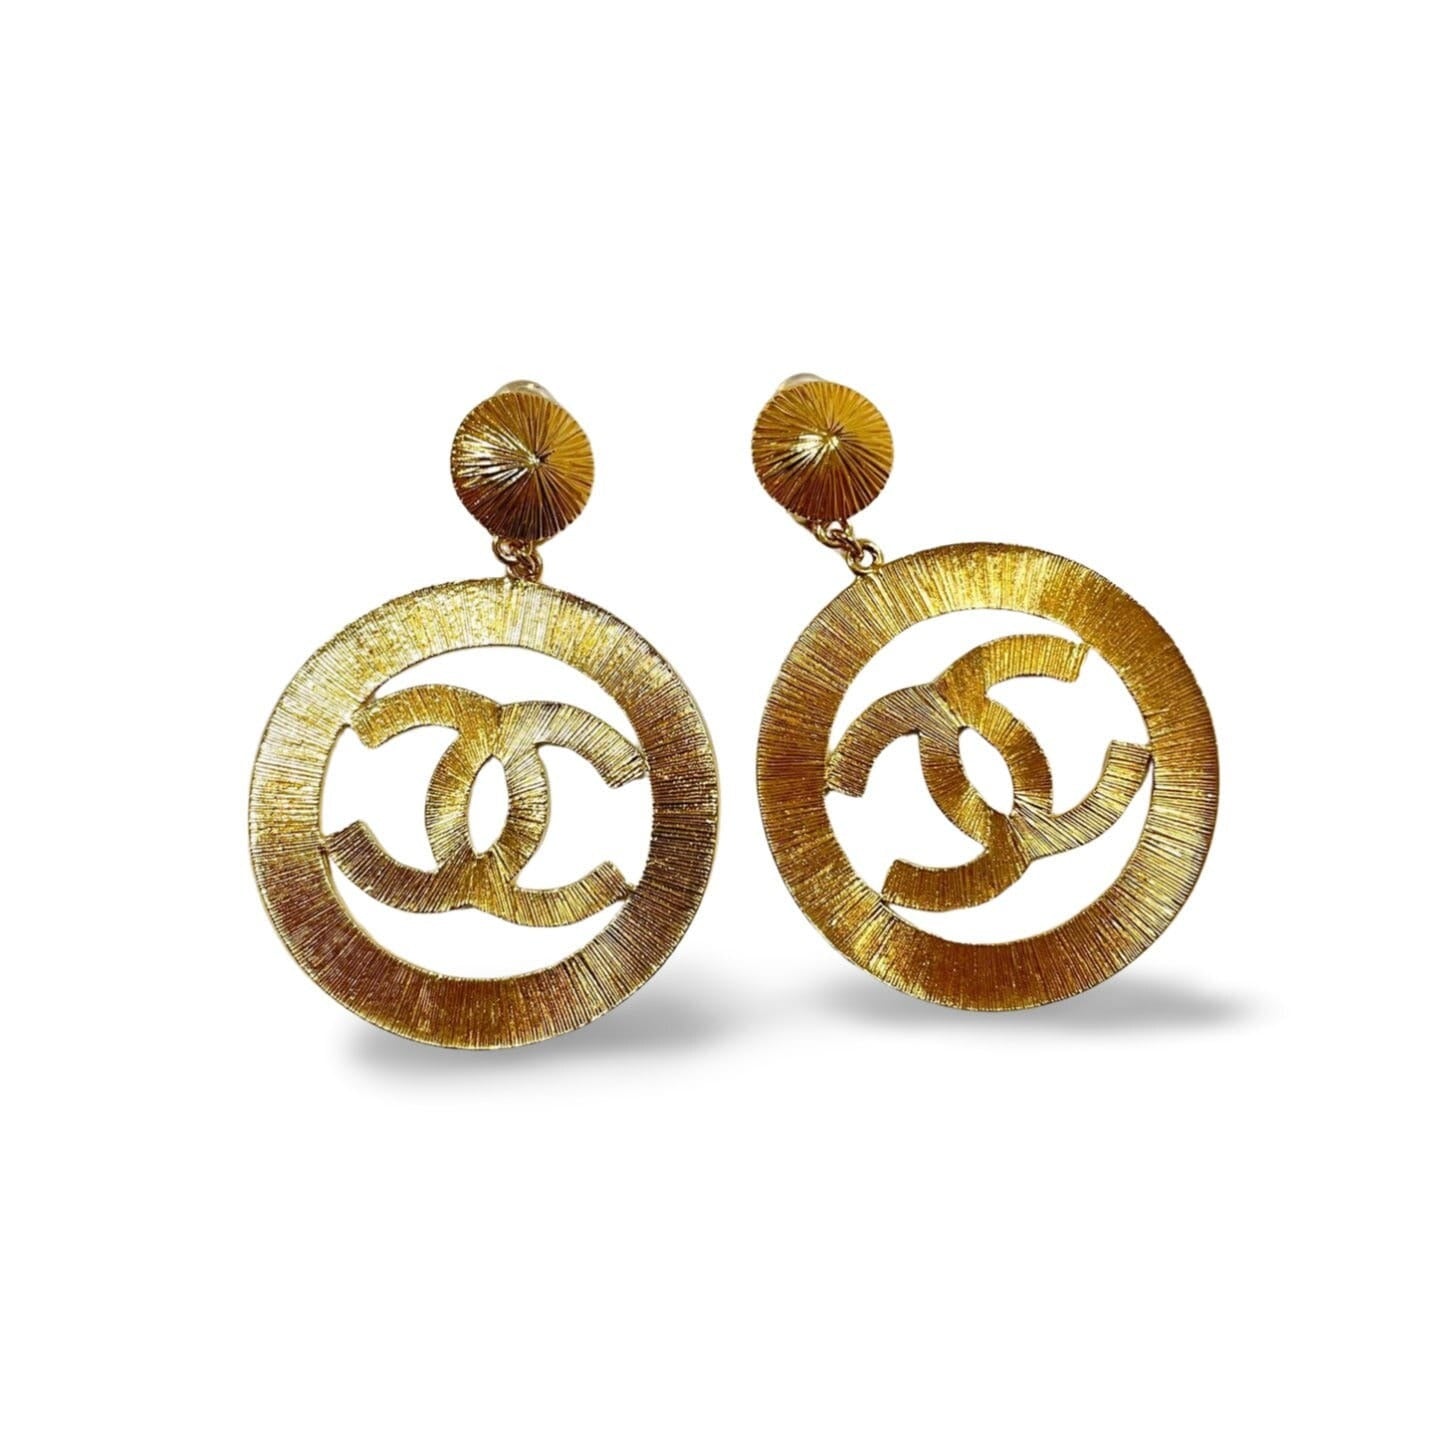 Vintage CHANEL extra large round hoop earrings with CC mark motif. Dangle earrings. Rare and collectible jewelry from Chanel. 050509ac